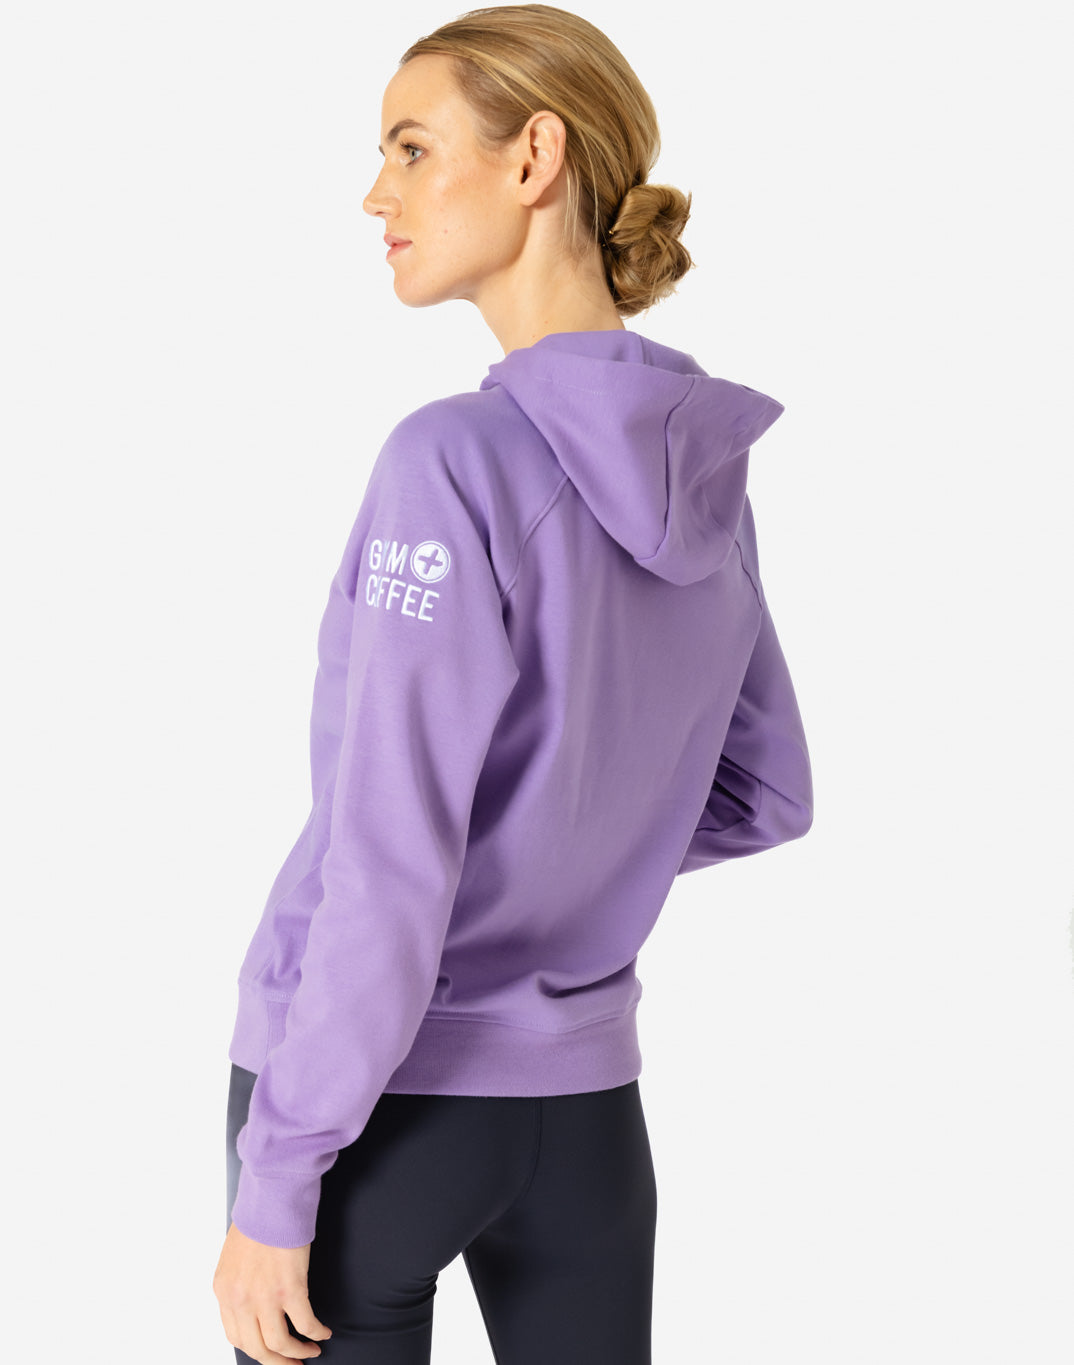 Chill Base Hoodie in Lavender